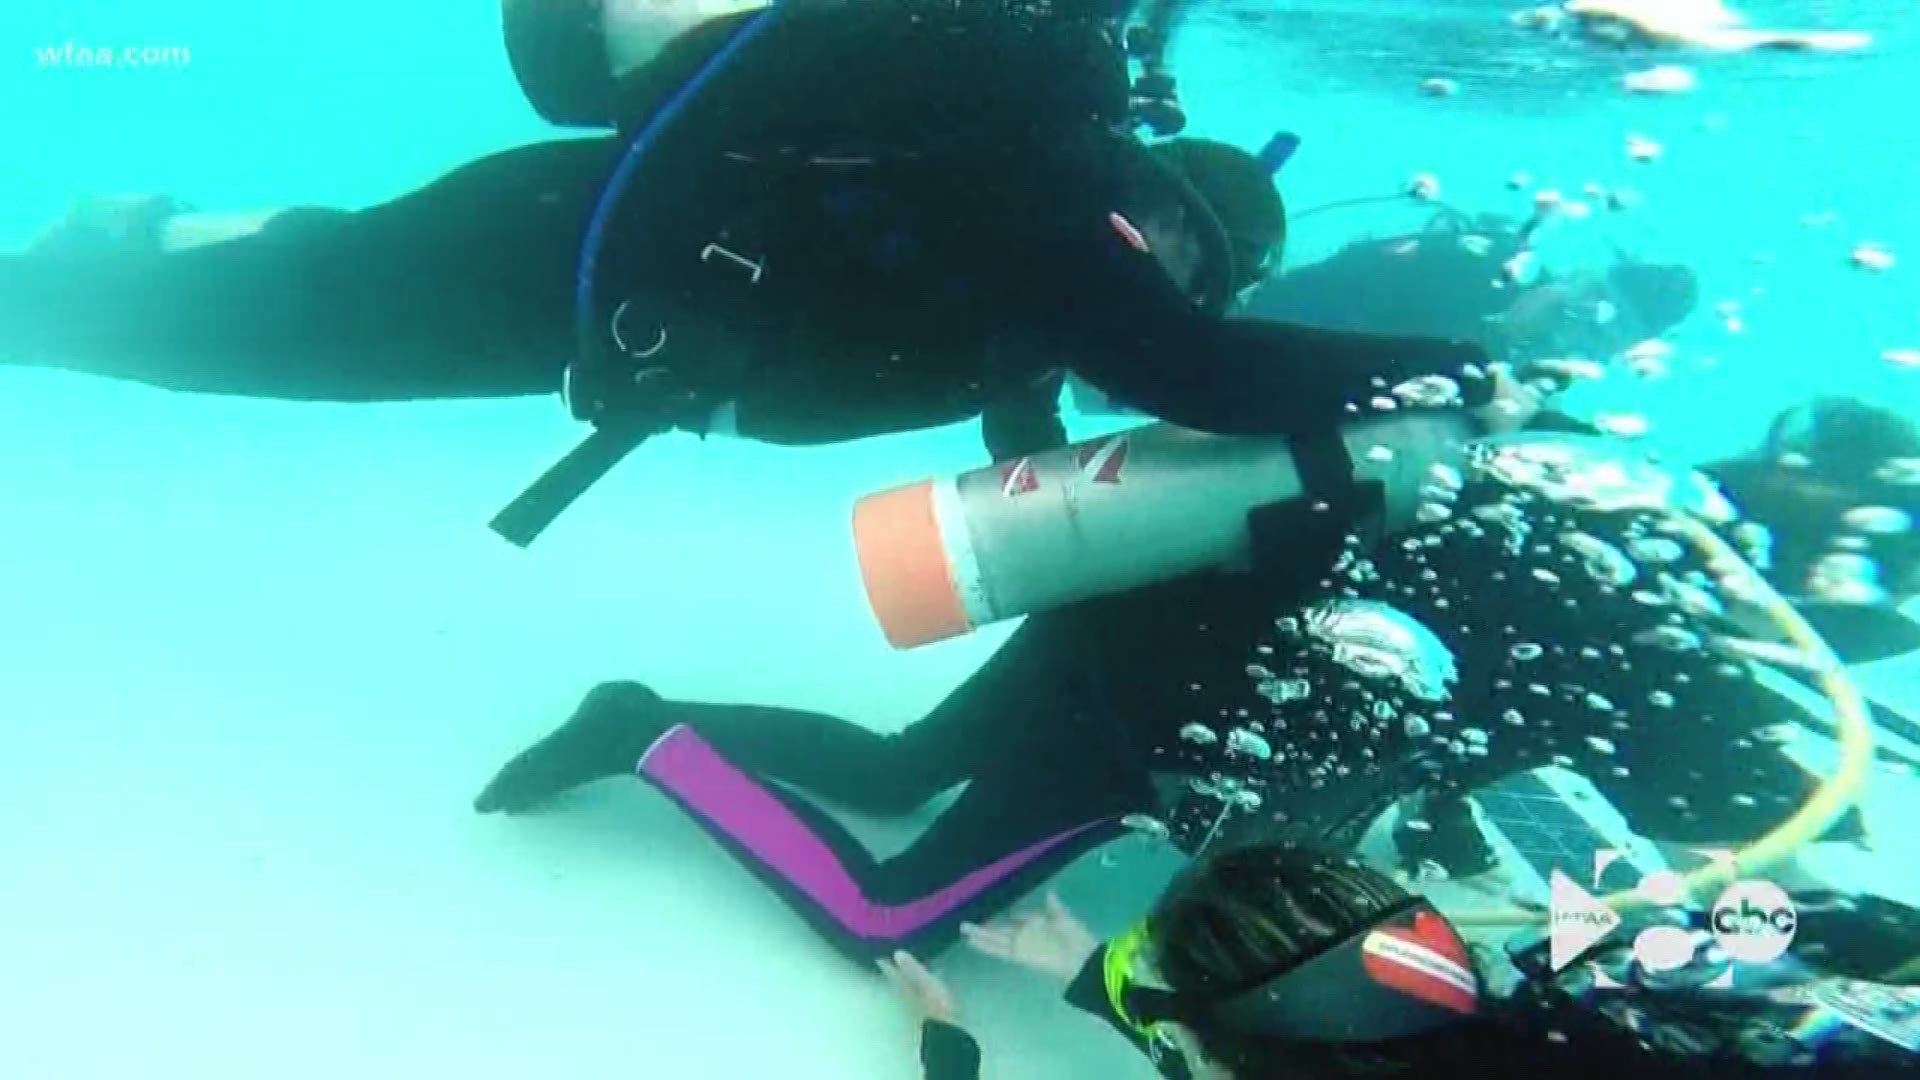 Adaptive program helps people with disabilities learn to scuba dive